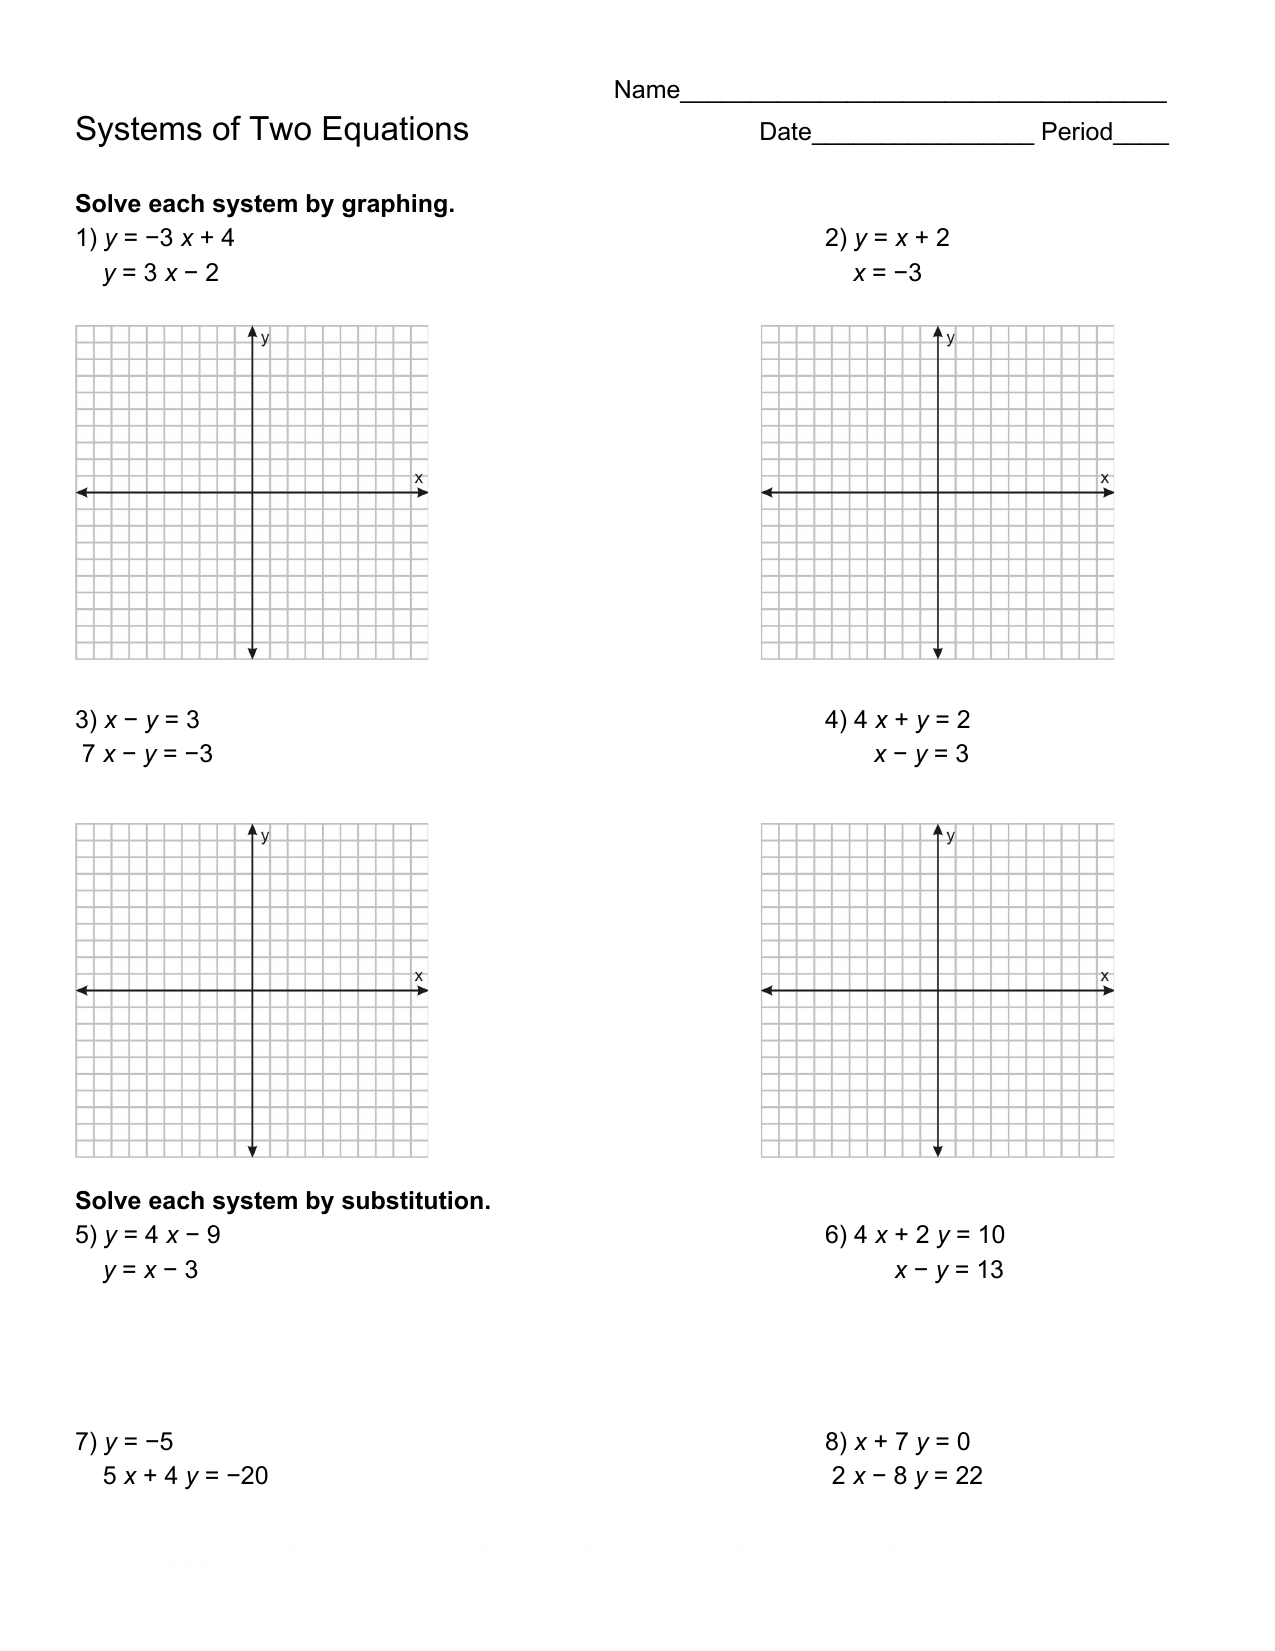 Systems of Two Equations With Systems Of Equations Substitution Worksheet